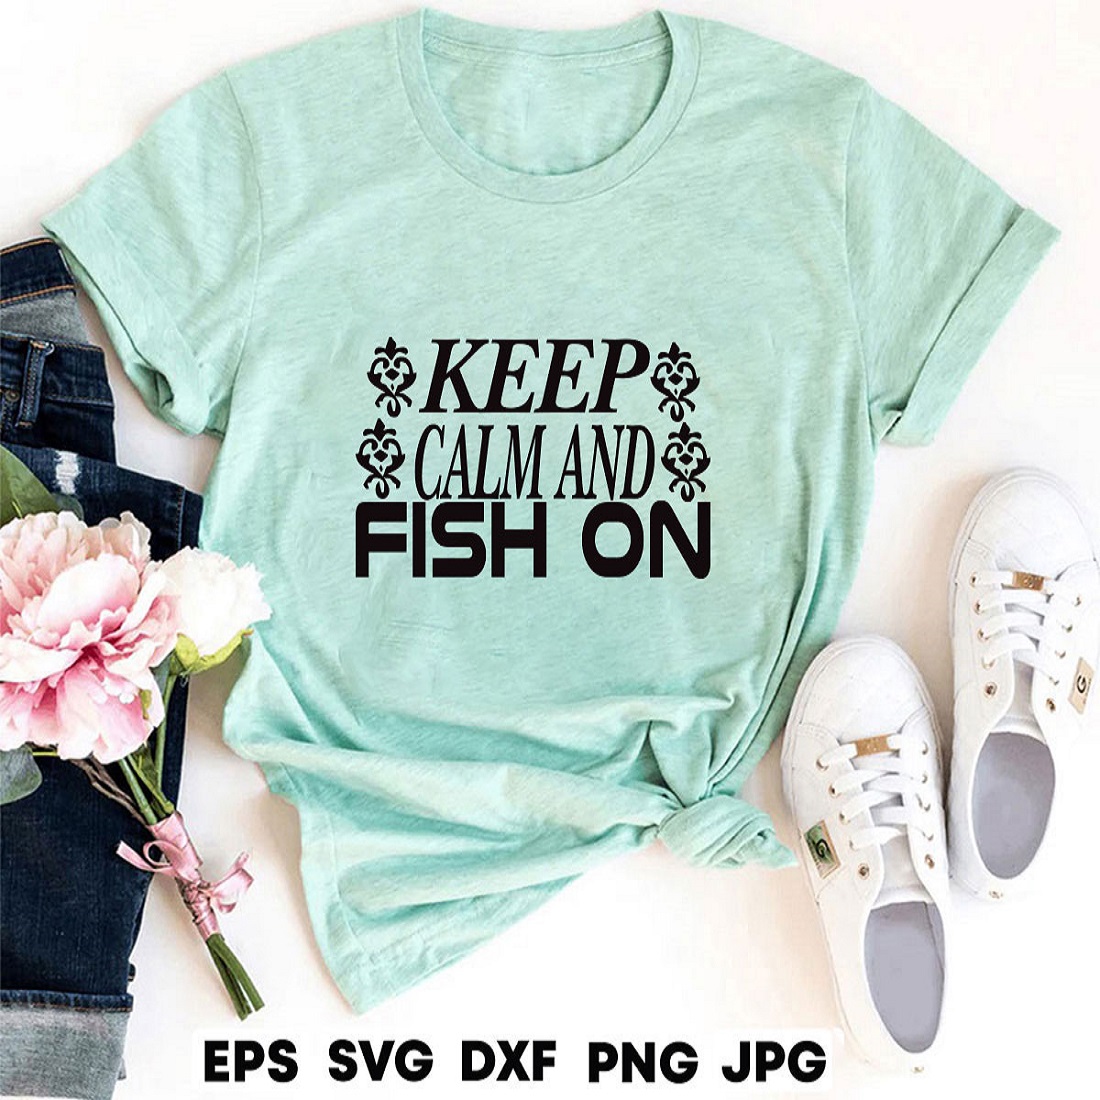 keep calm and fish on jj 948